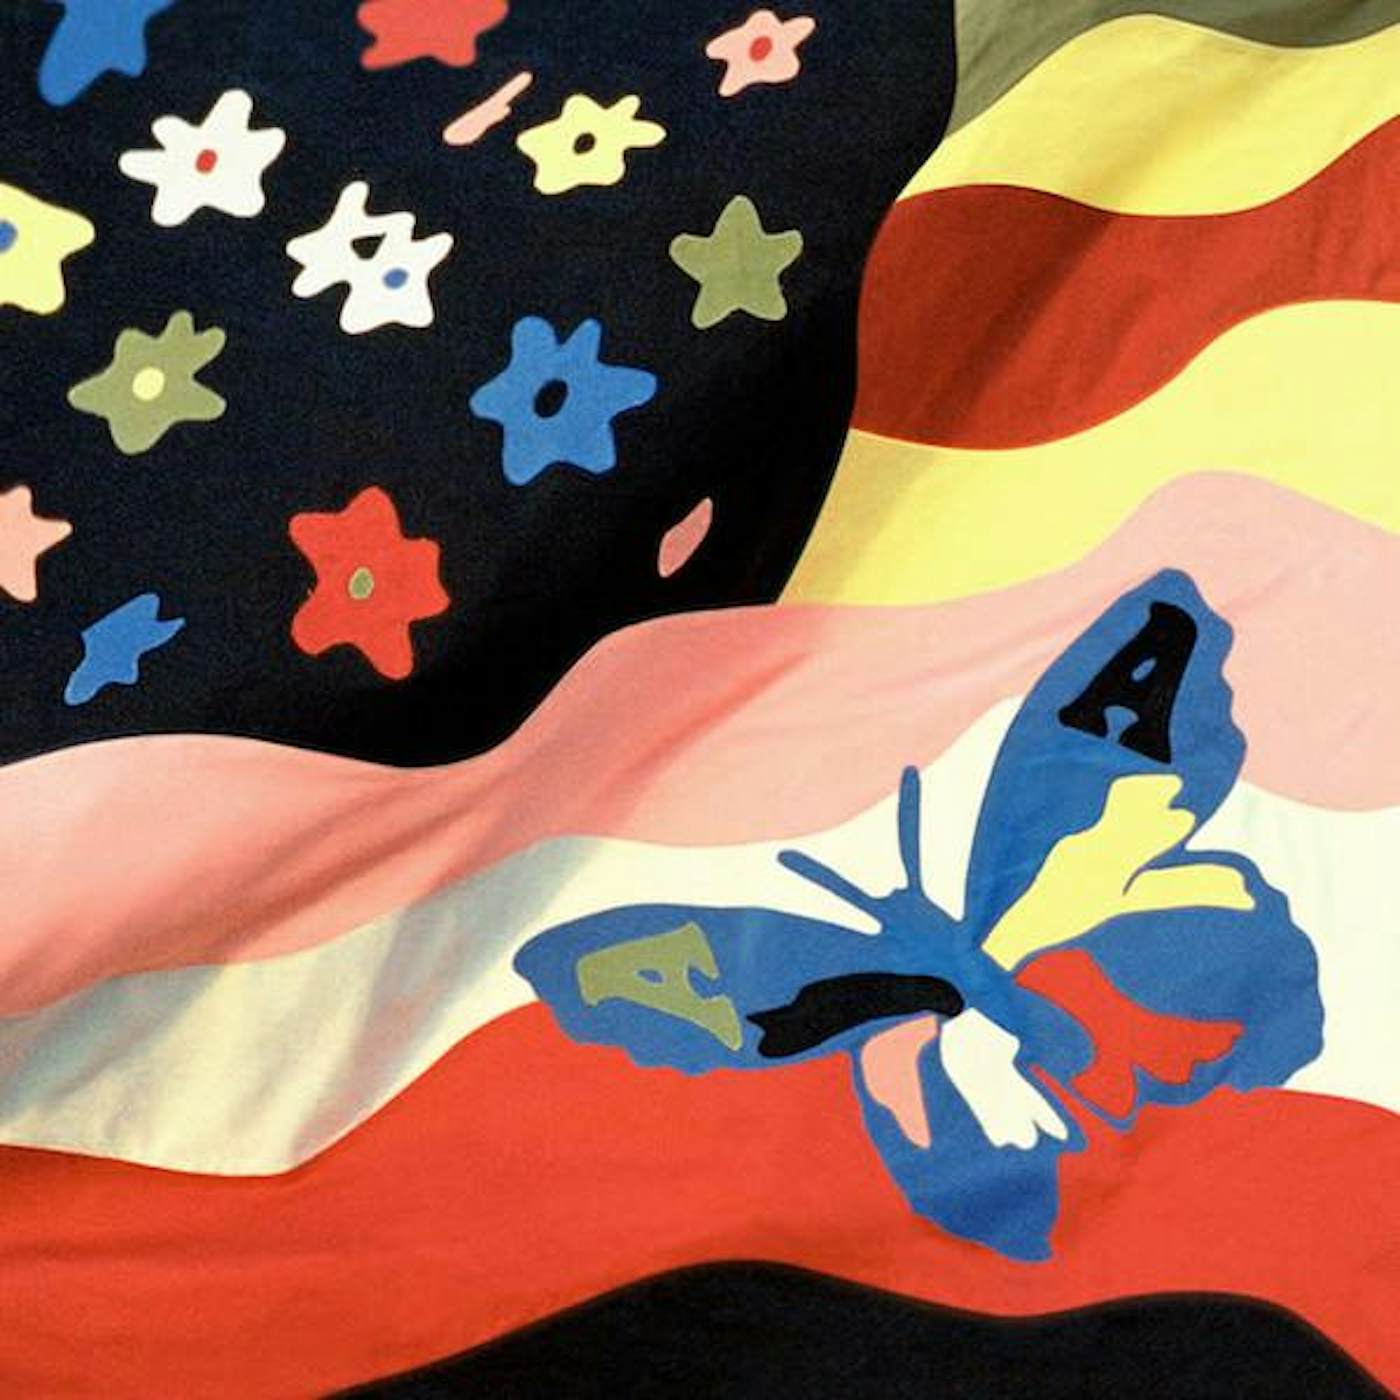 The Avalanches Official Store